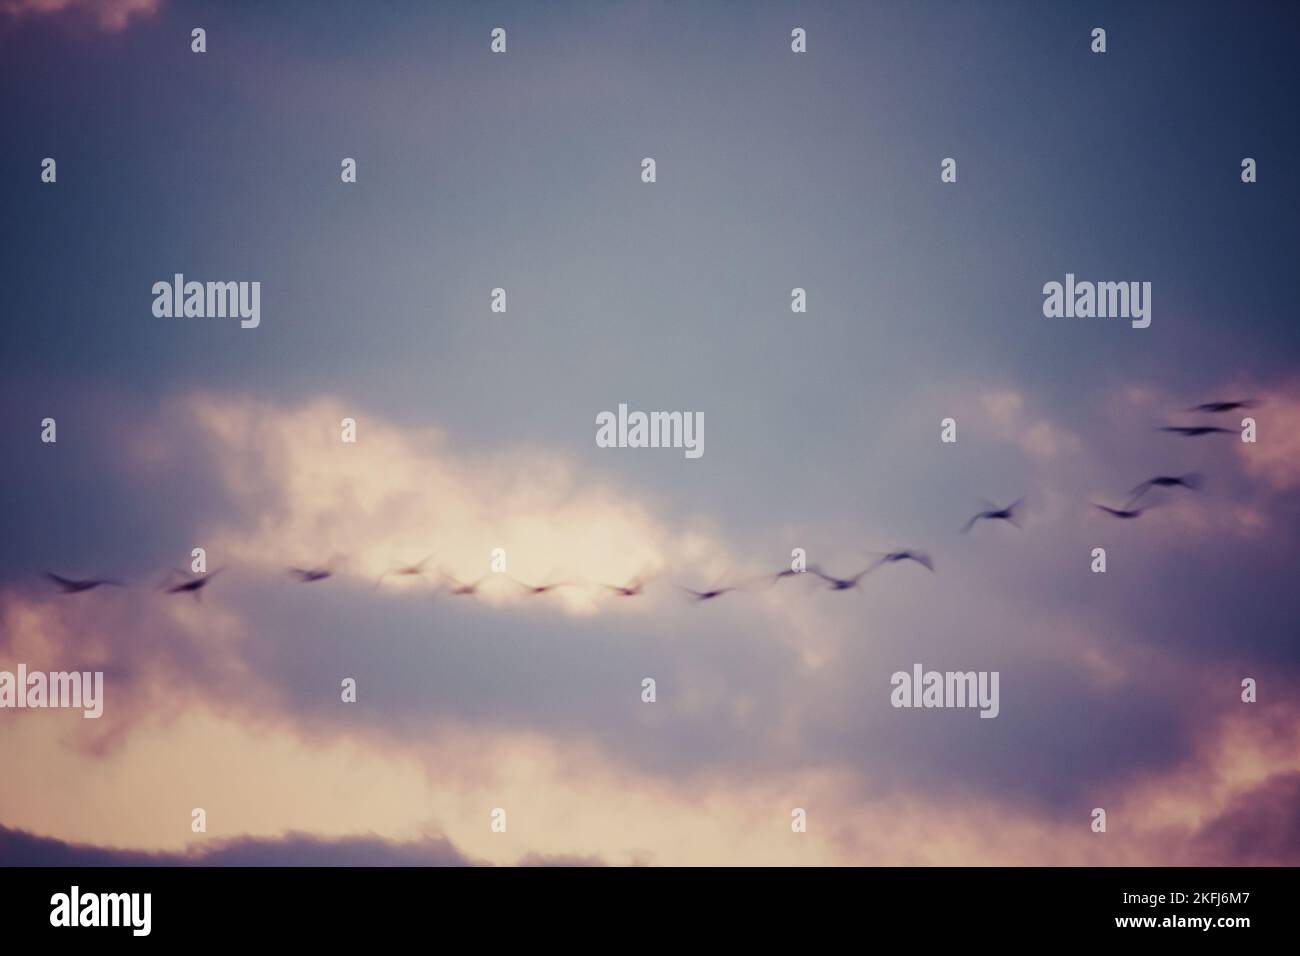 Abstract landscape, birds in motion on evening sky blurred landscape Stock Photo